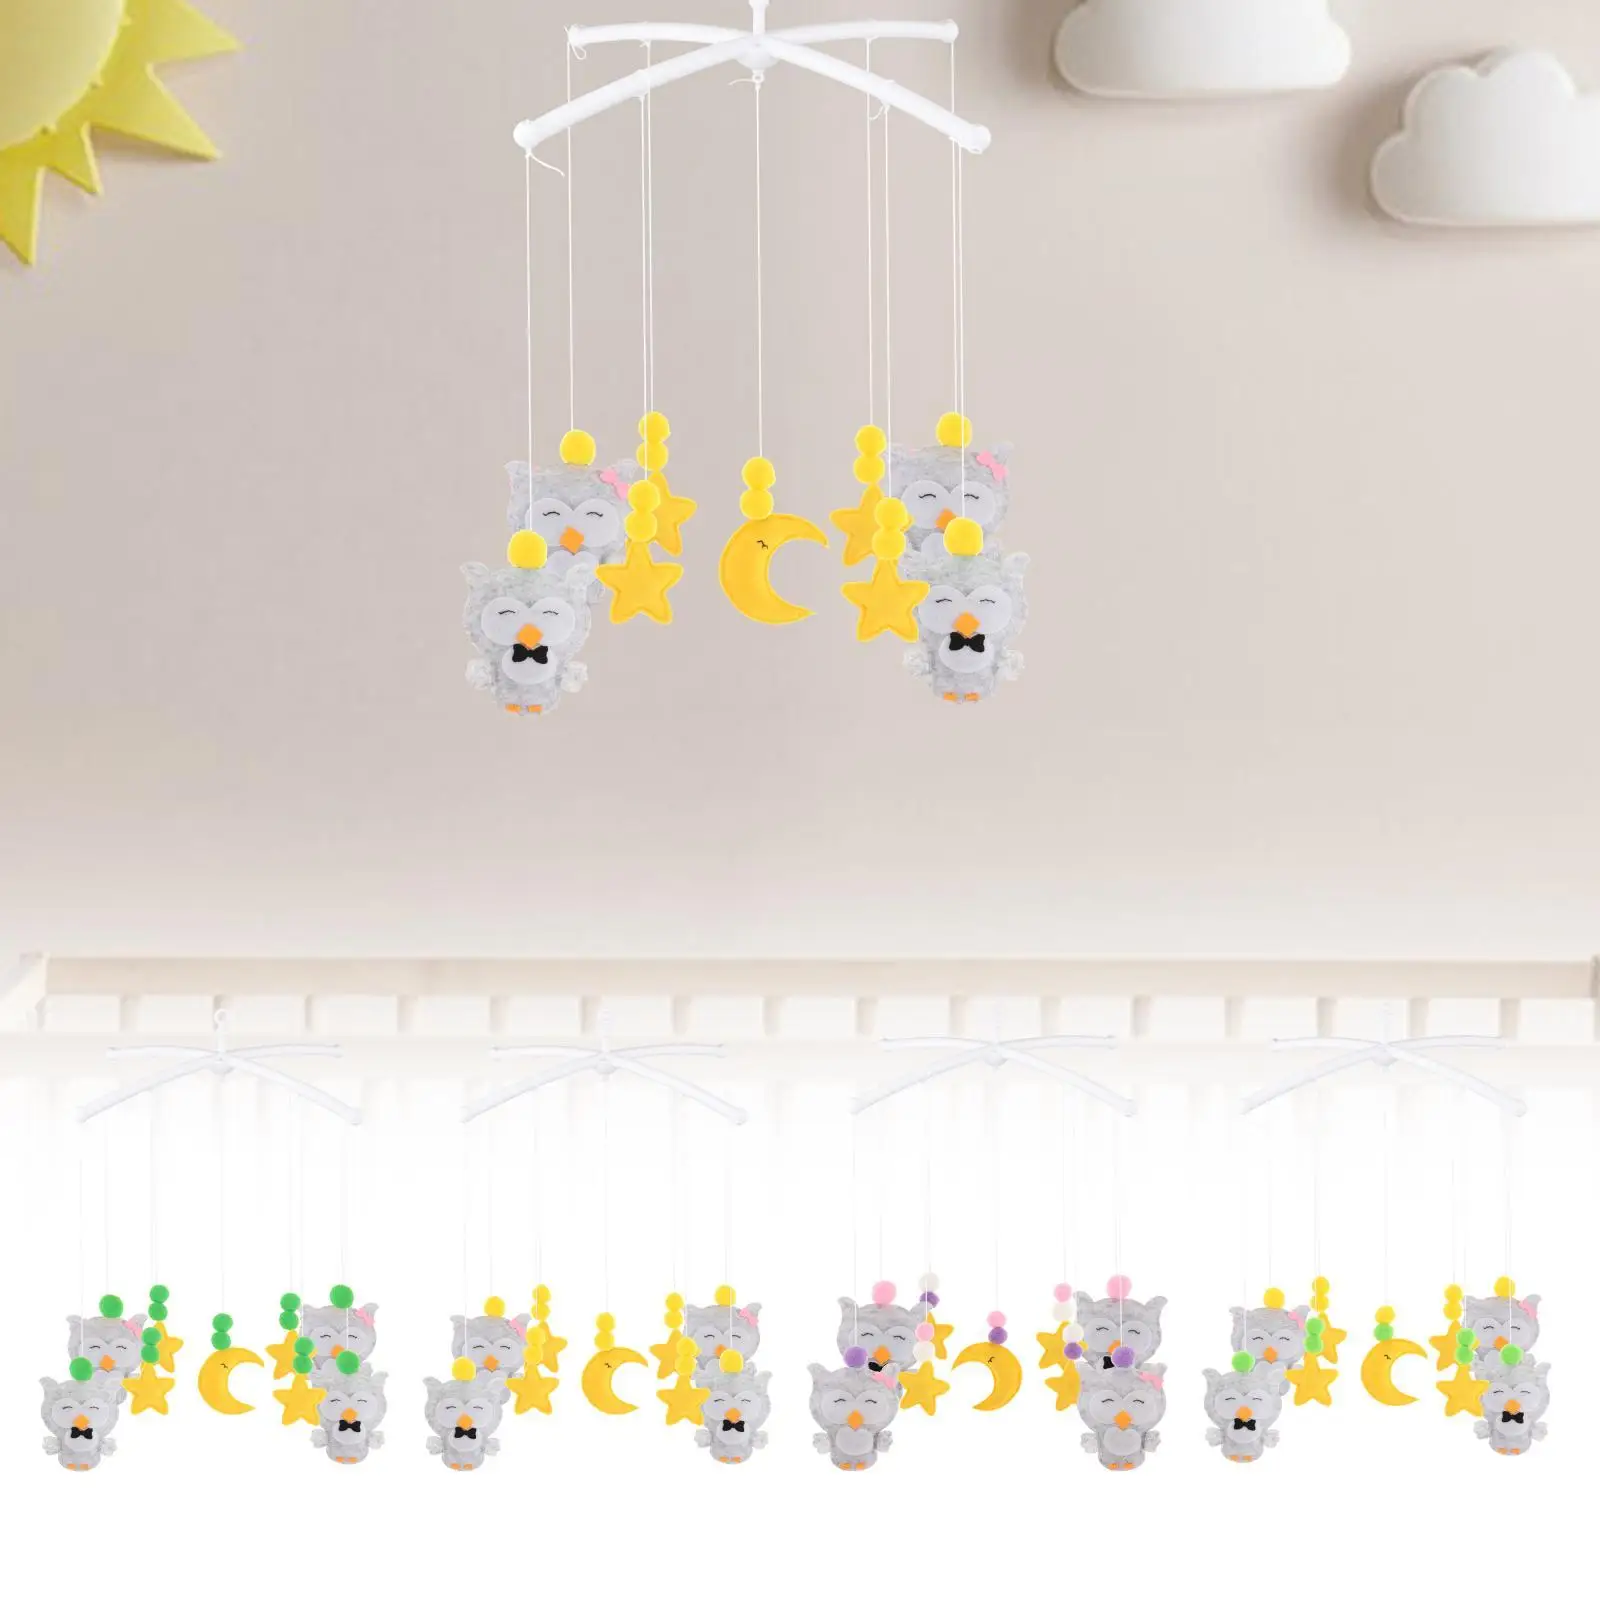 Crib Hanging Toys Felt Crib Mobile Hanging Interactive Unisex Cute Baby Rattle Toy Bed for Nursery Pushchair Pram Decoration